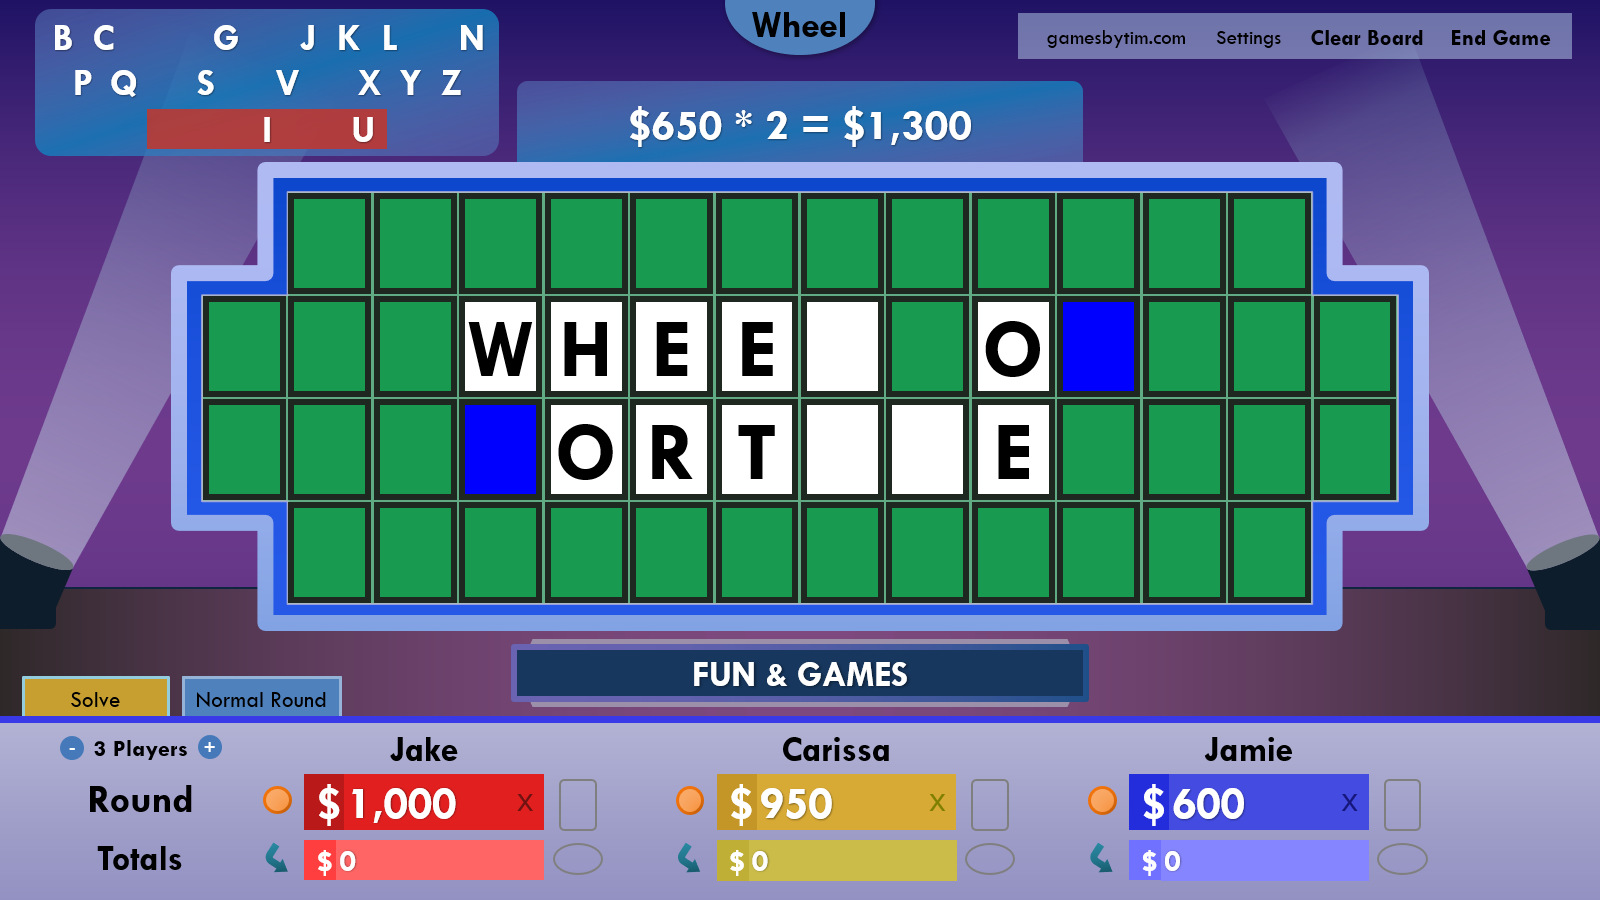 fortune - Wheel of Fortune for PowerPoint - Games by Tim - Game WoFPPTScreenshot